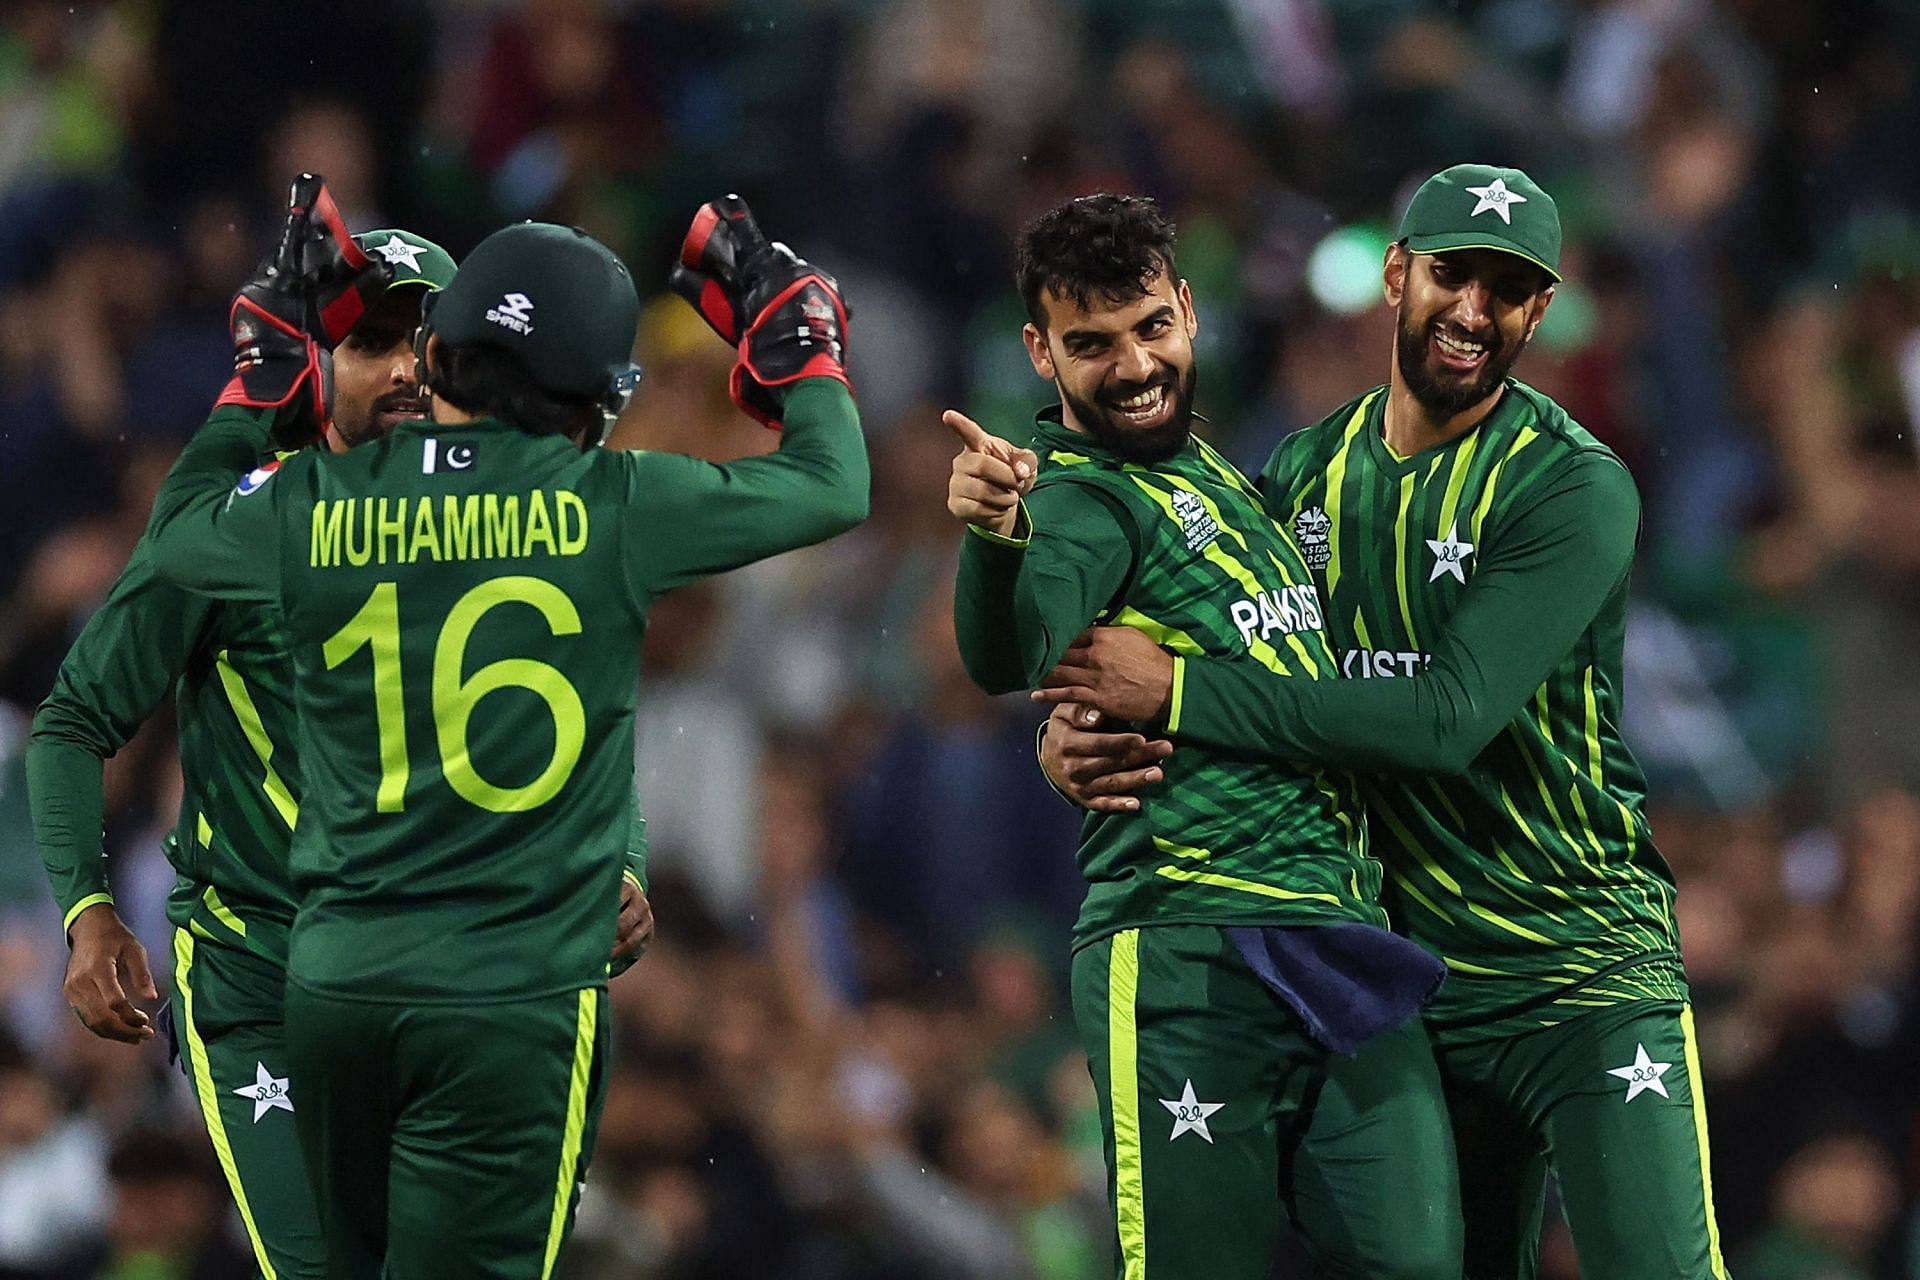 Shadab Khan struck twice in the eighth over of the South African innings.